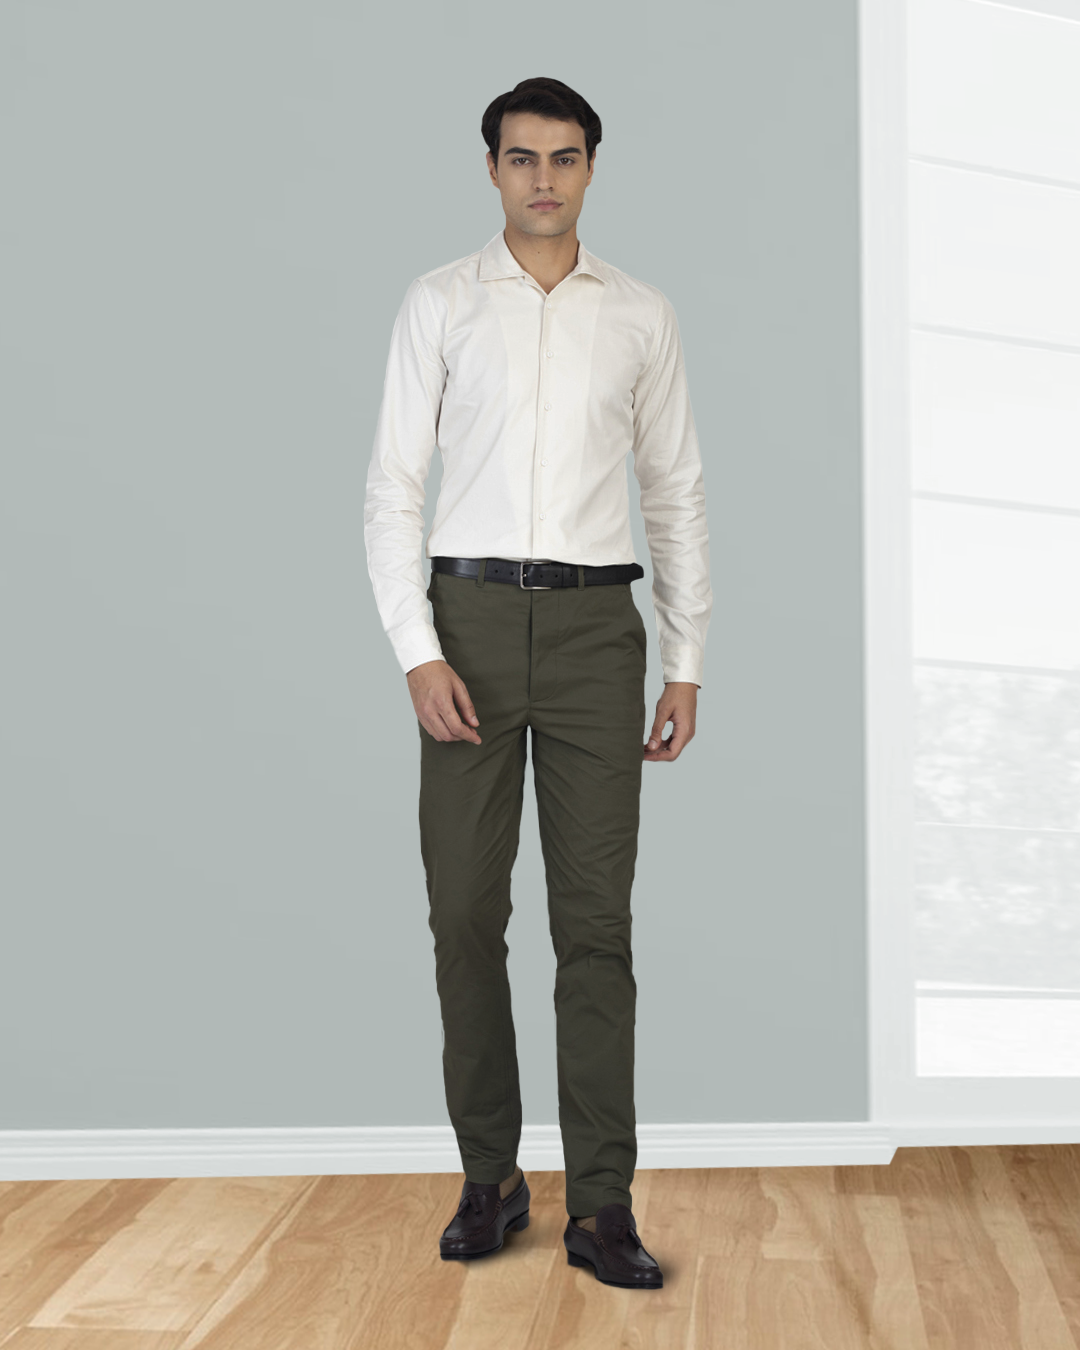 Model wearing custom Genoa Chino pants for men by Luxire in olive green hands at side